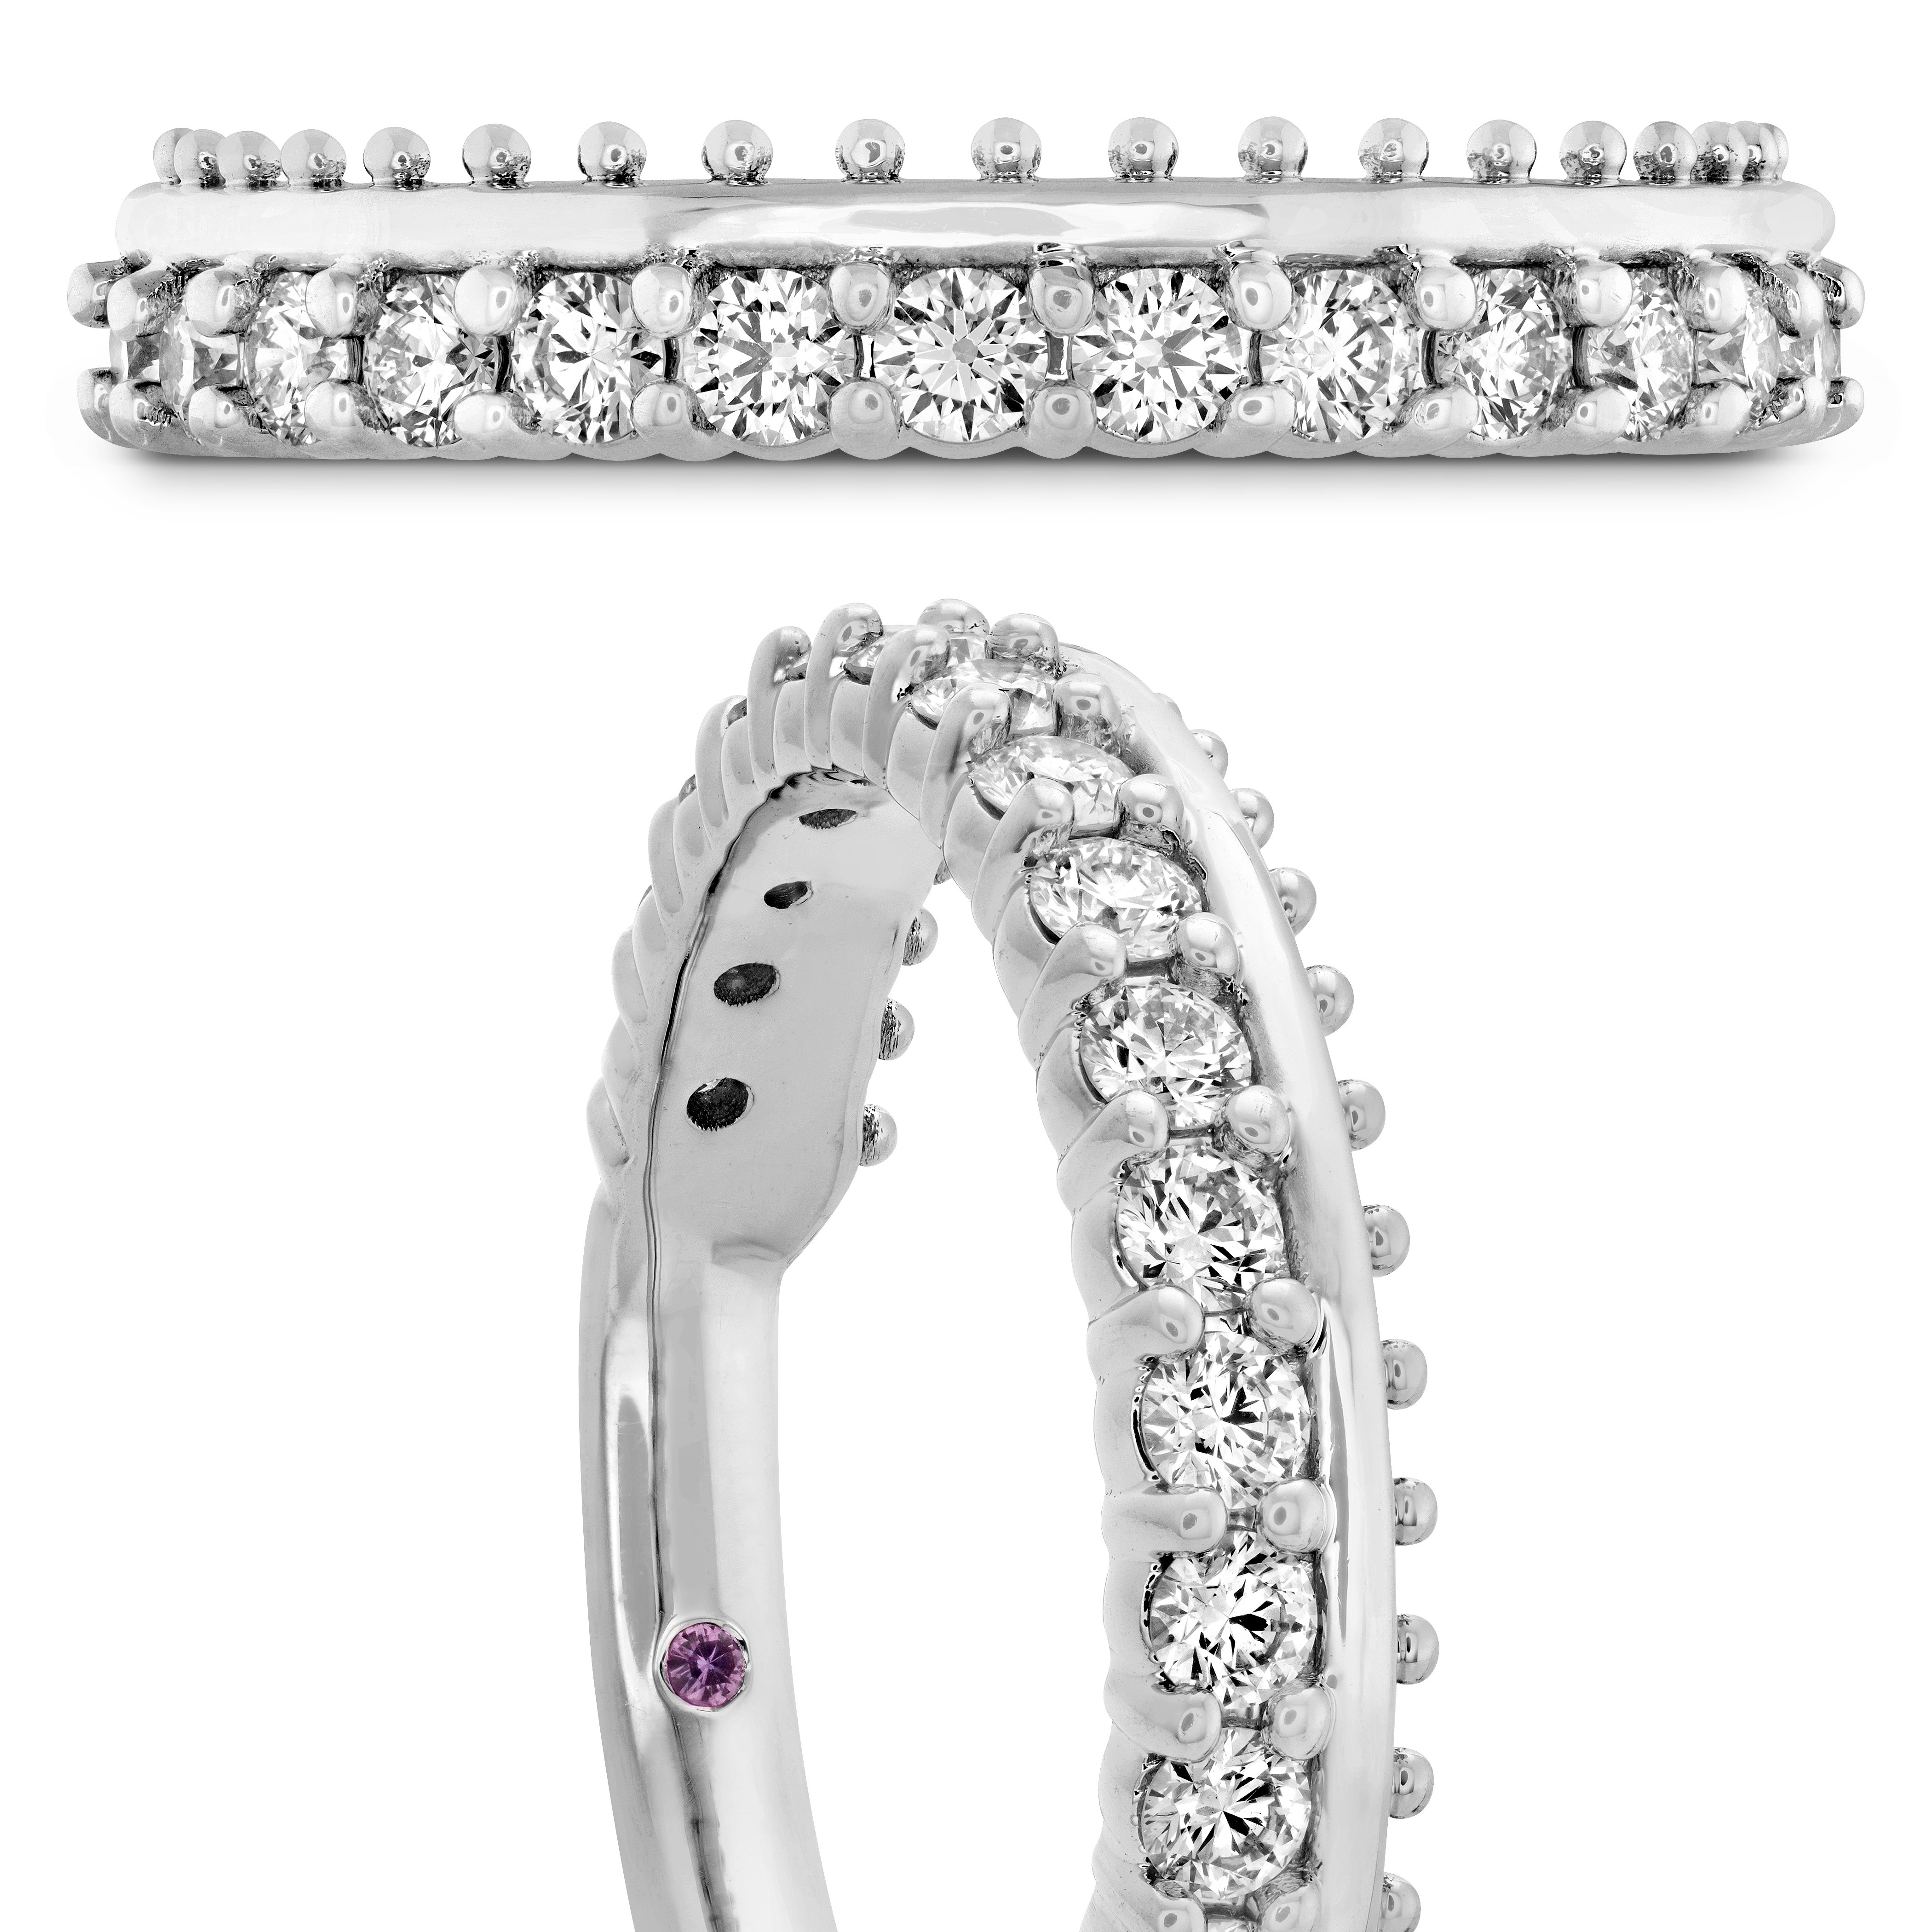 https://www.arthursjewelers.com/content/images/thumbs/Original/Sloane Picot All in a Row Band_2-176288849.jpg